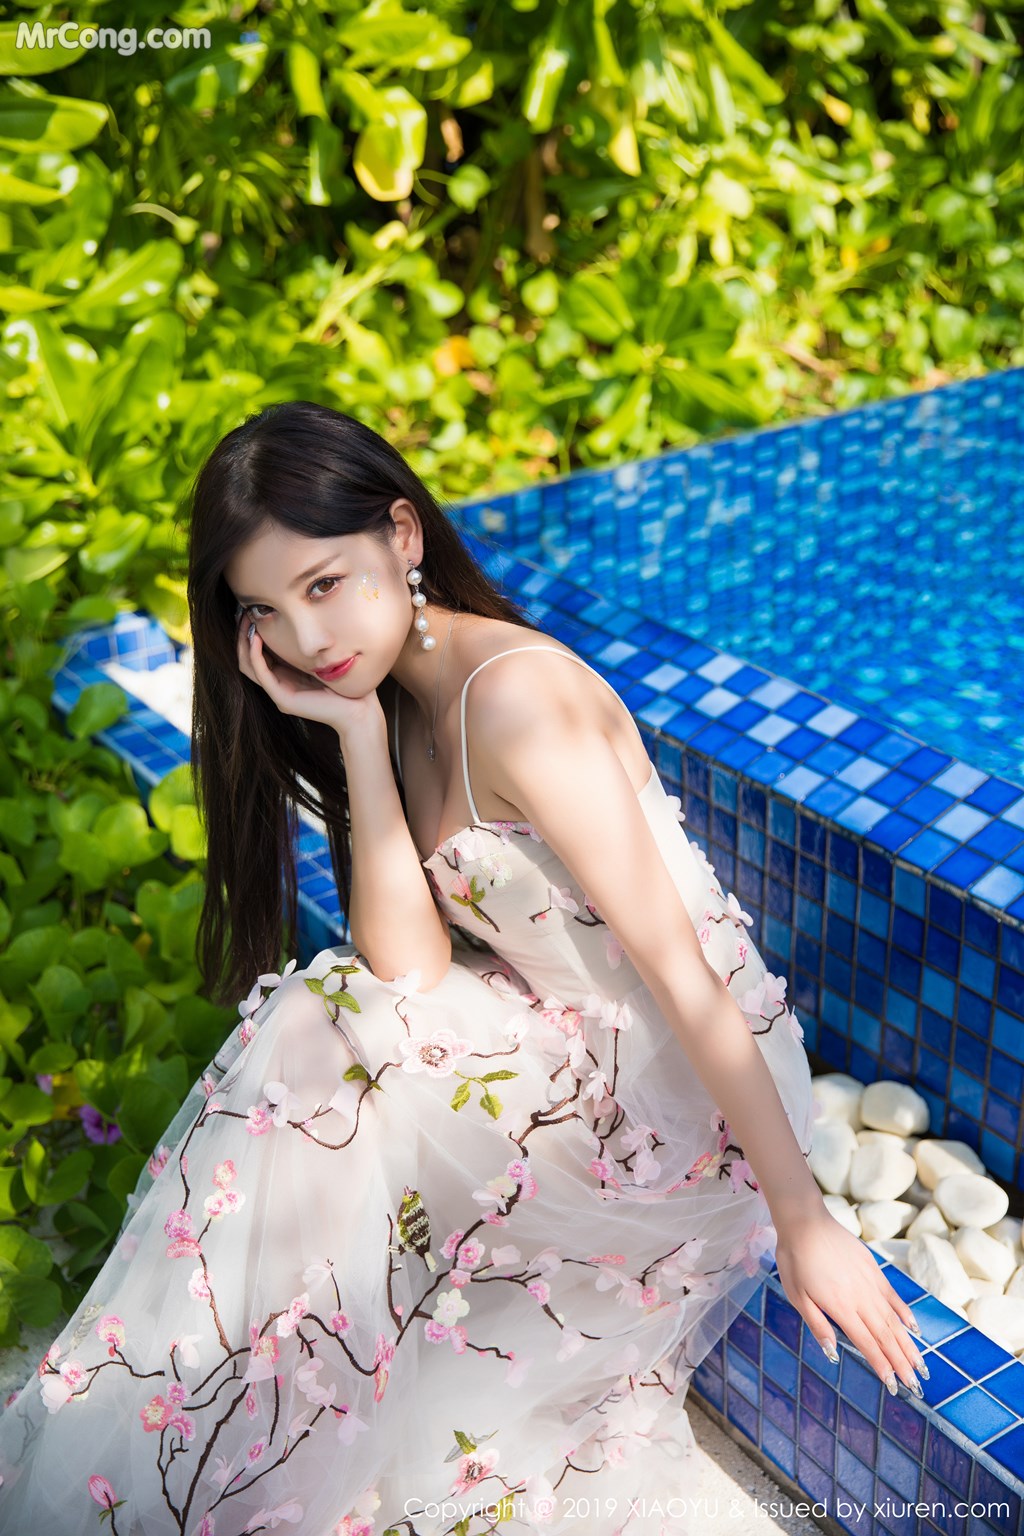 XiaoYu Vol.109: Yang Chen Chen (杨晨晨 sugar) (56 pictures)